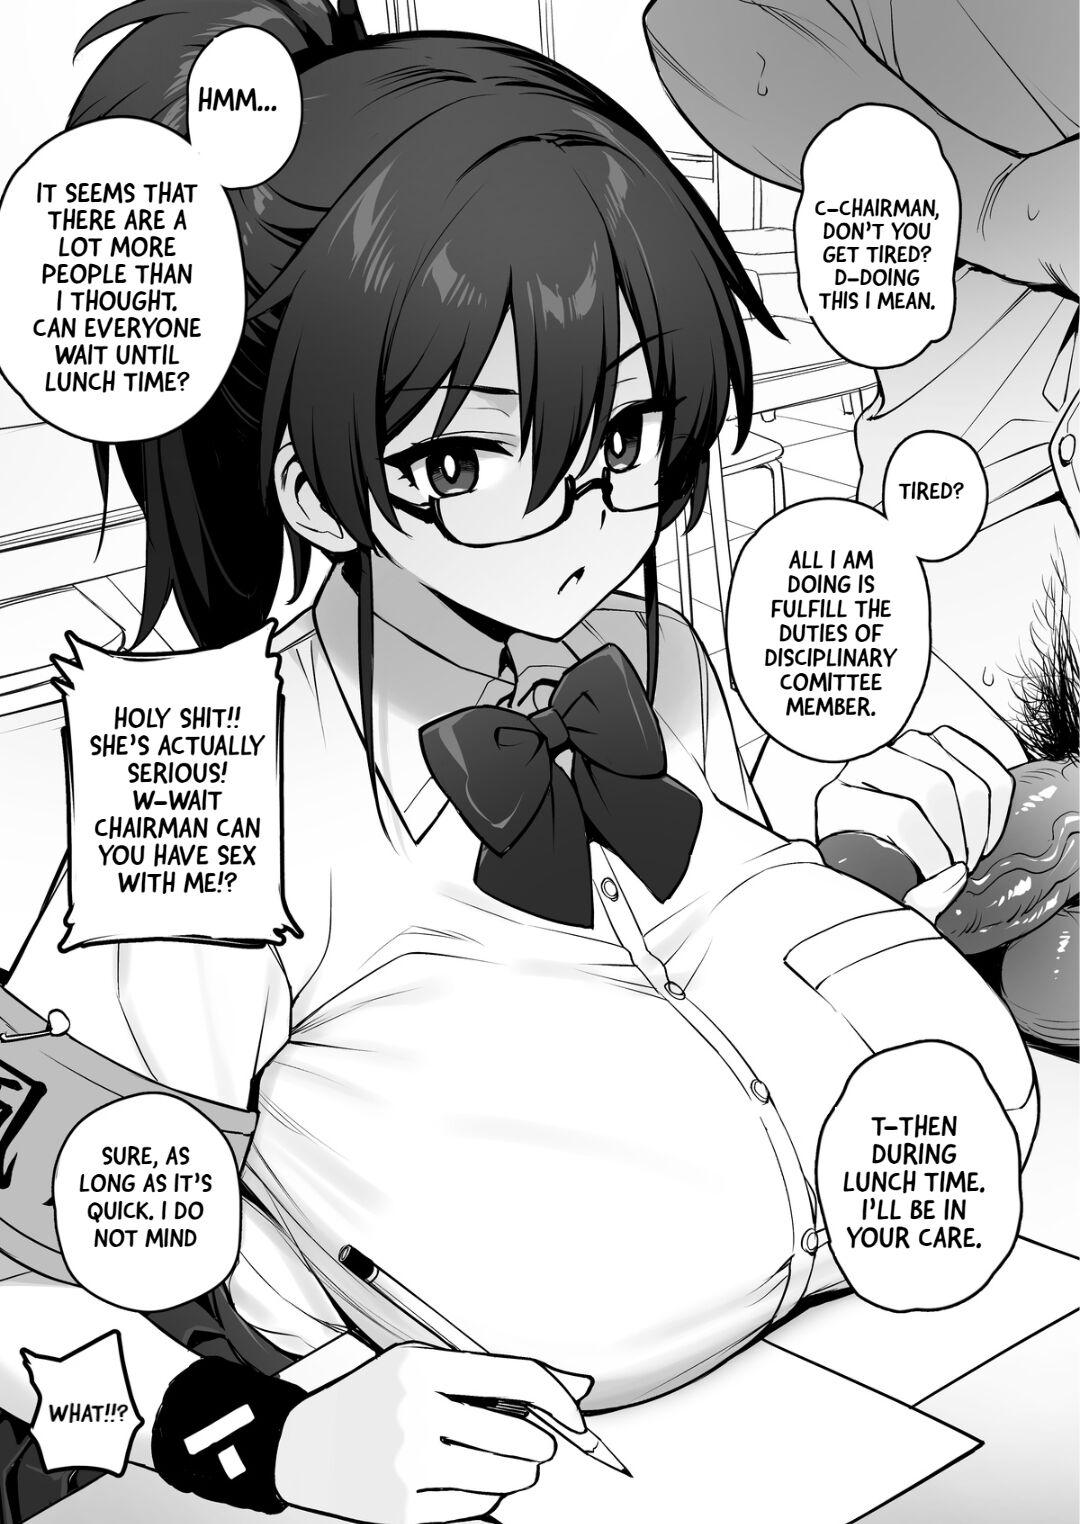 Sexcam Rumor Has It That The New Chairman of Disciplinary Committee Has Huge Breasts. Culo - Page 8